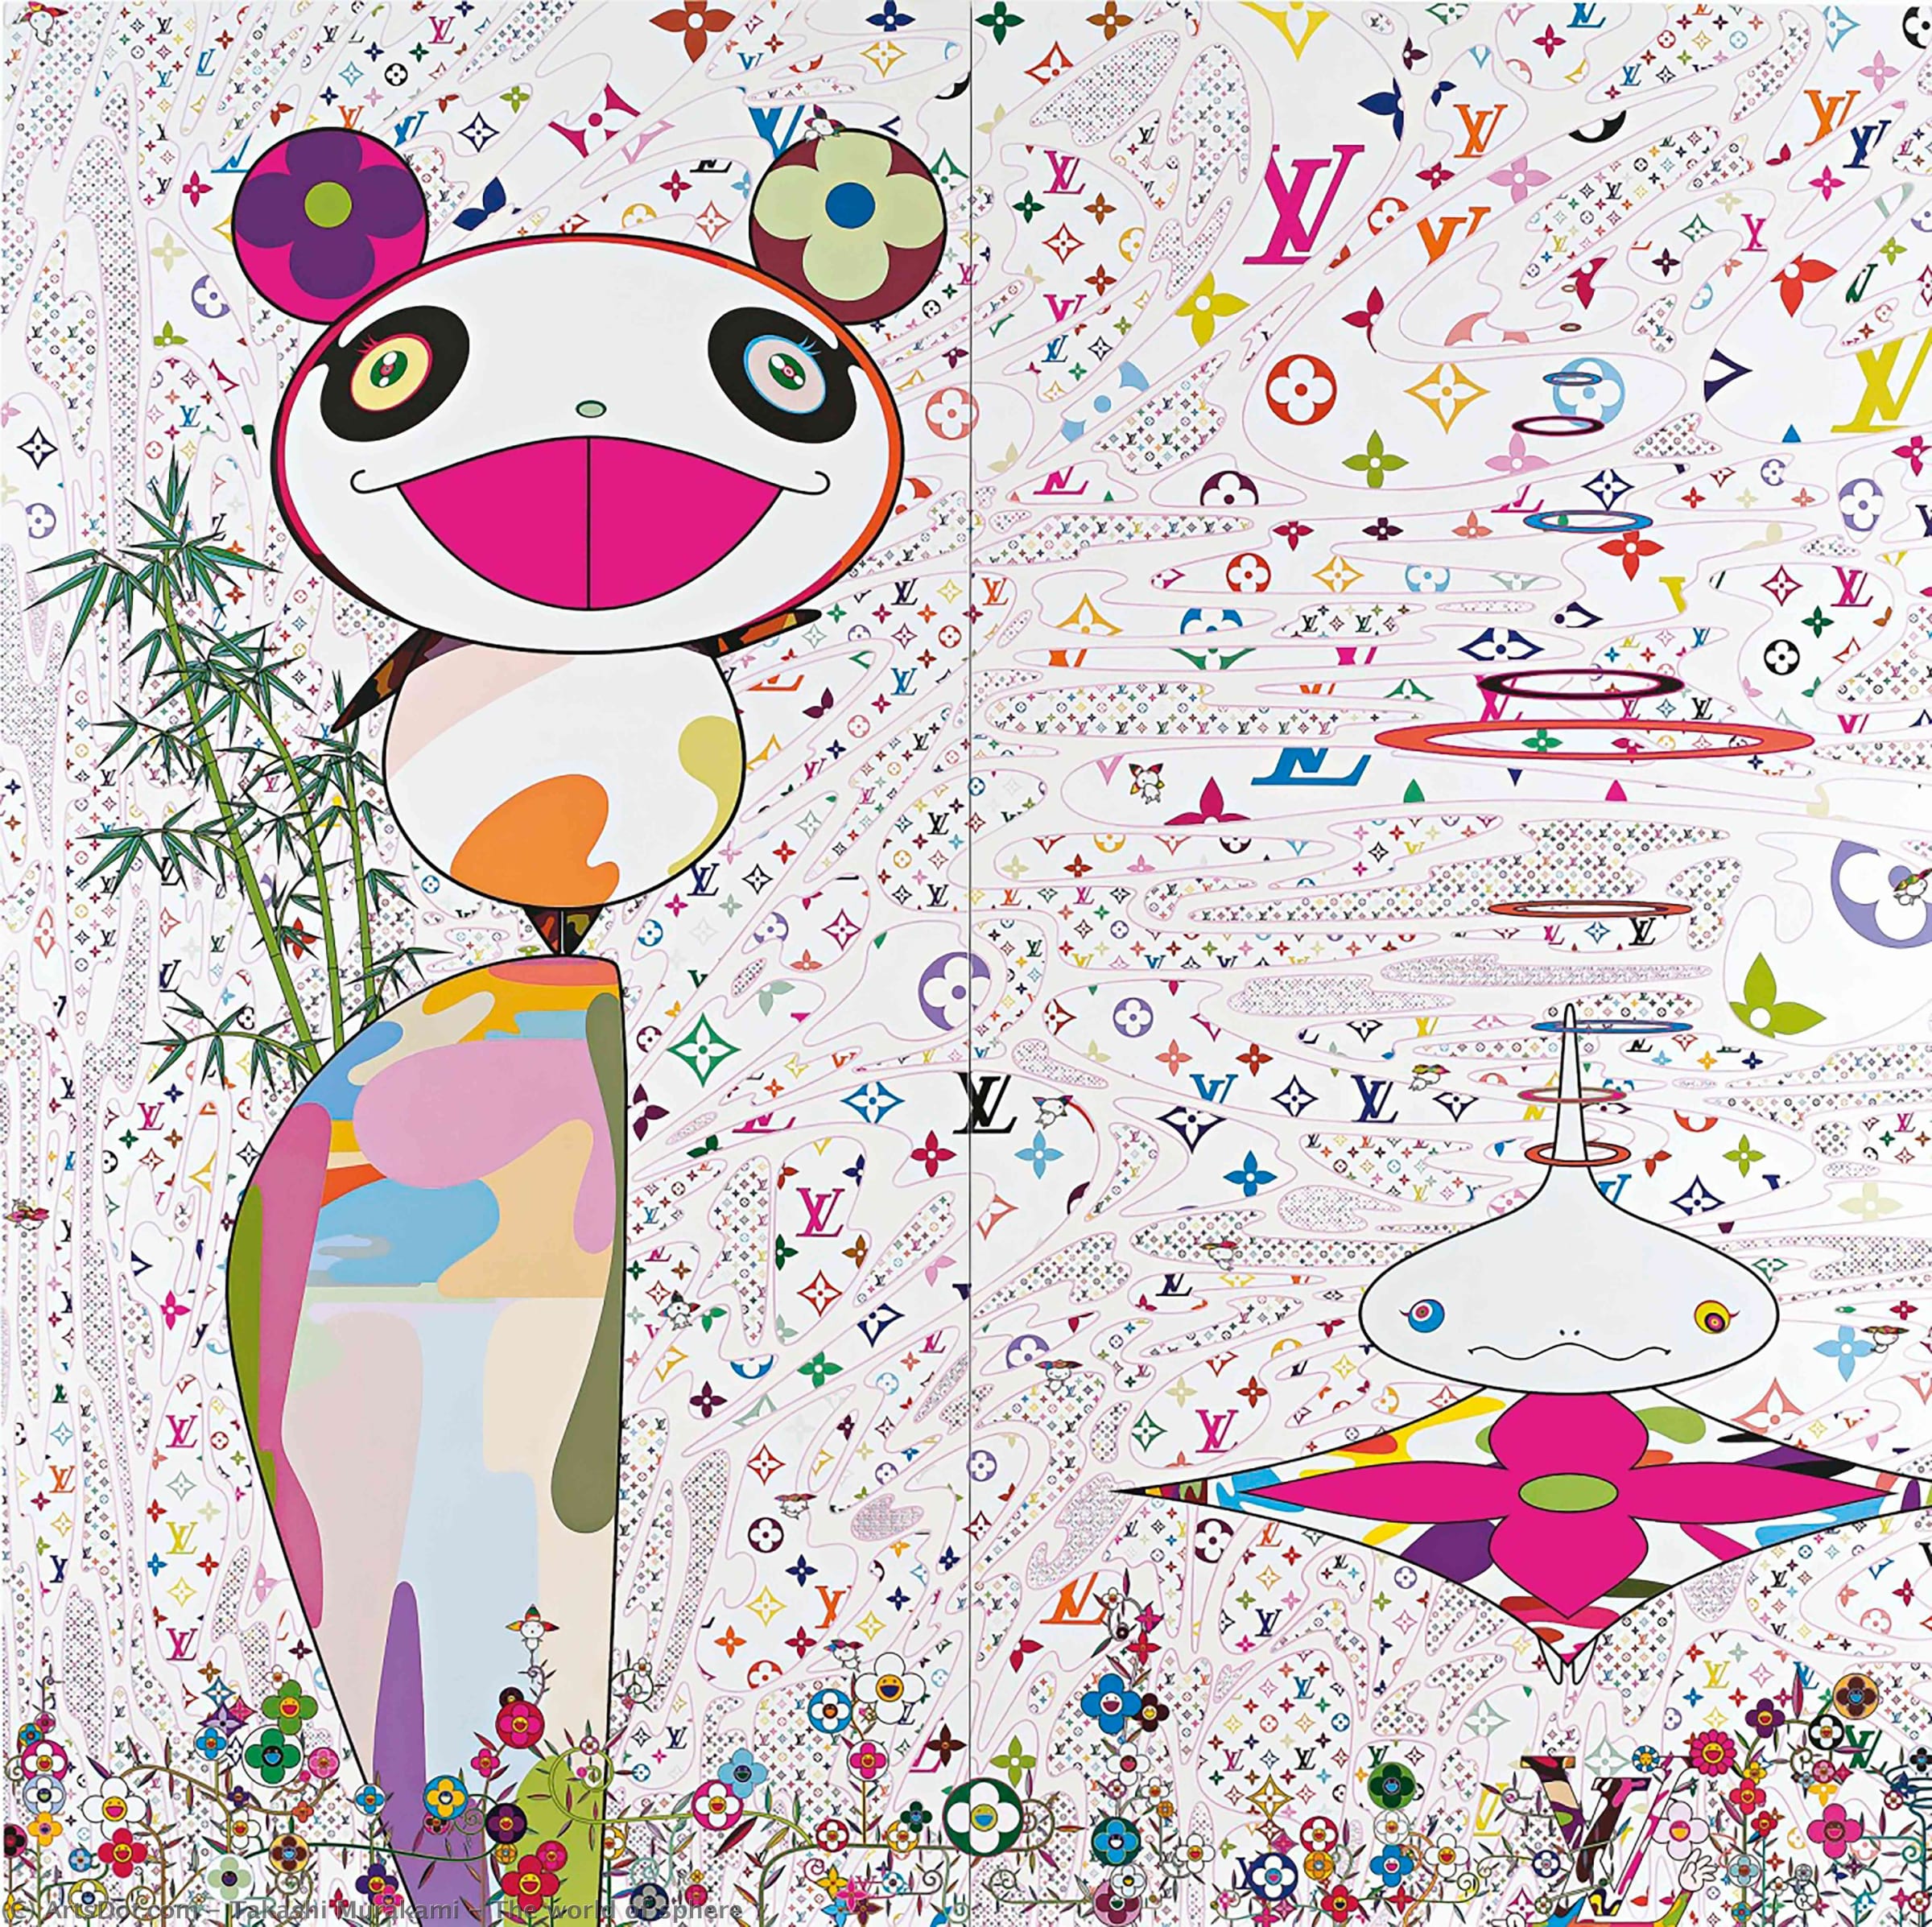 A picture I took at the Takashi Murakami Gallery at the Louis